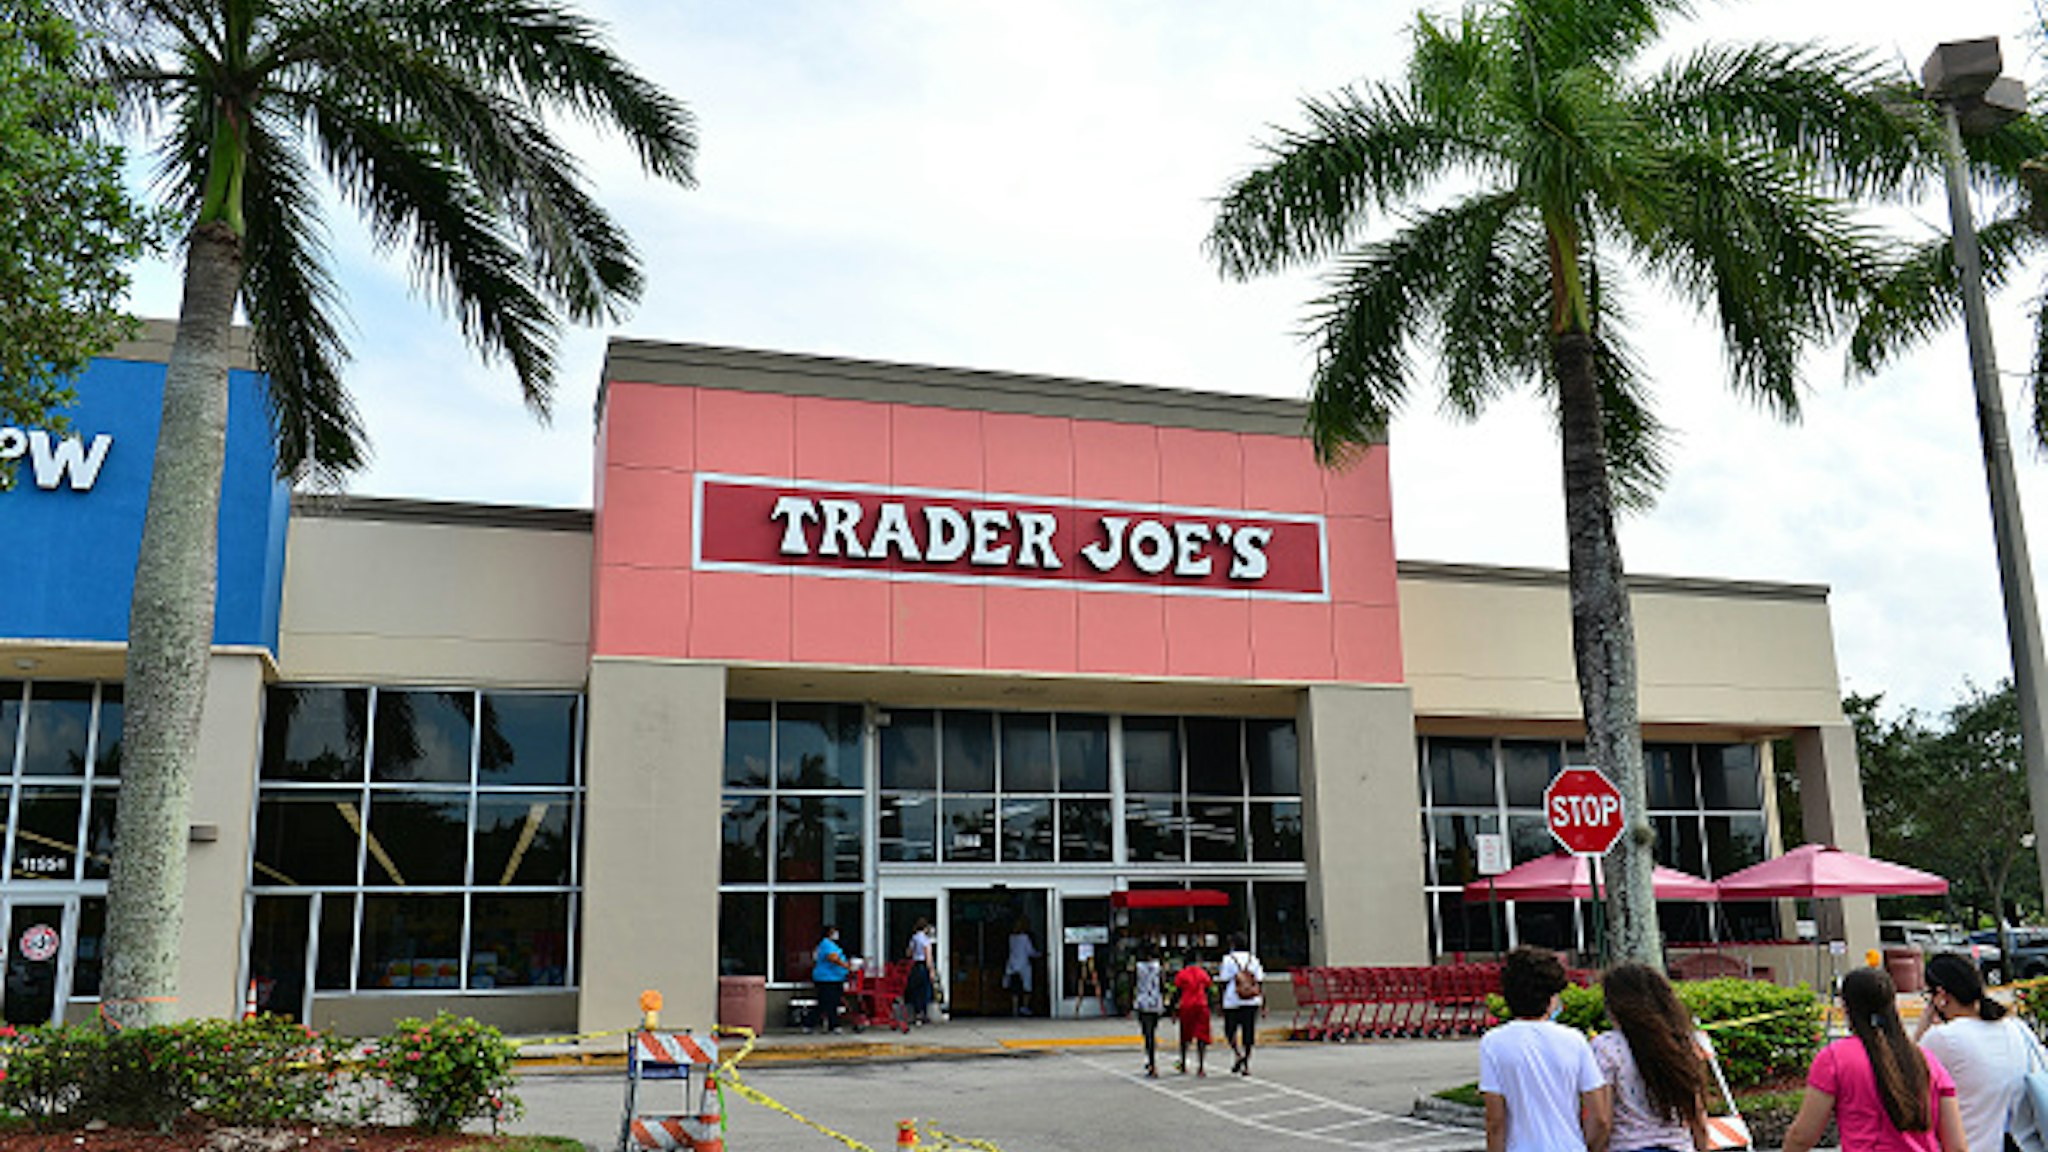 PEMBROKE PINES, FLORIDA - JULY 16: Customers wearing face masks enter a Trader Joe's store on July 16, 2020 in Pembroke Pines, Florida. Some major U.S. corporations are requiring masks to be worn in their stores upon entering to control the spread of COVID-19.